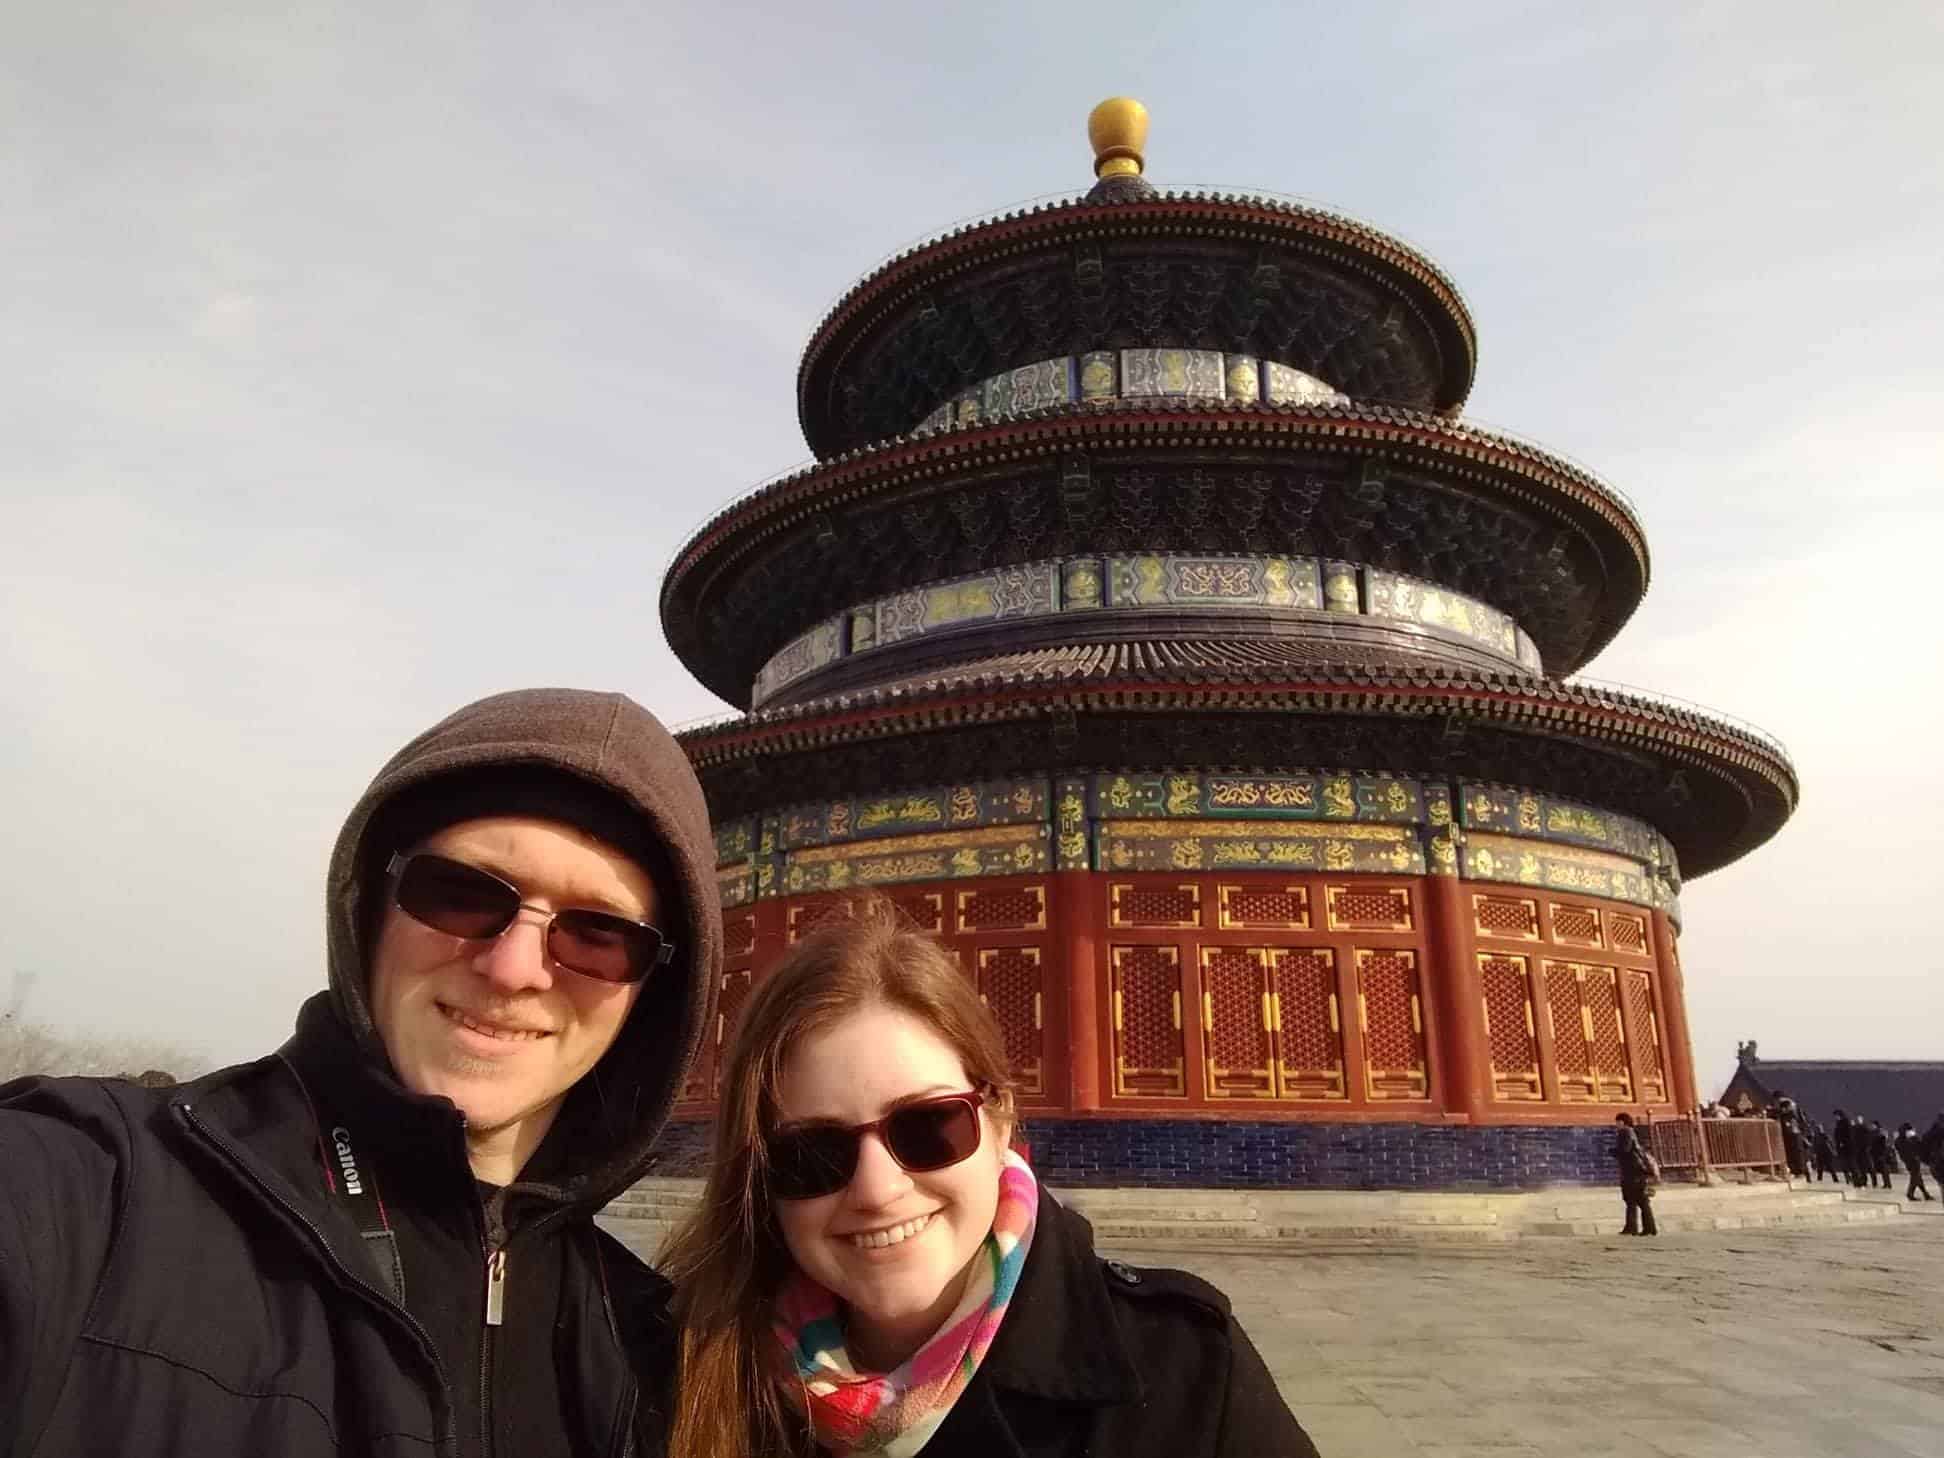 Derek and Kacie in front of the Temple of Heaven, Beijing, China